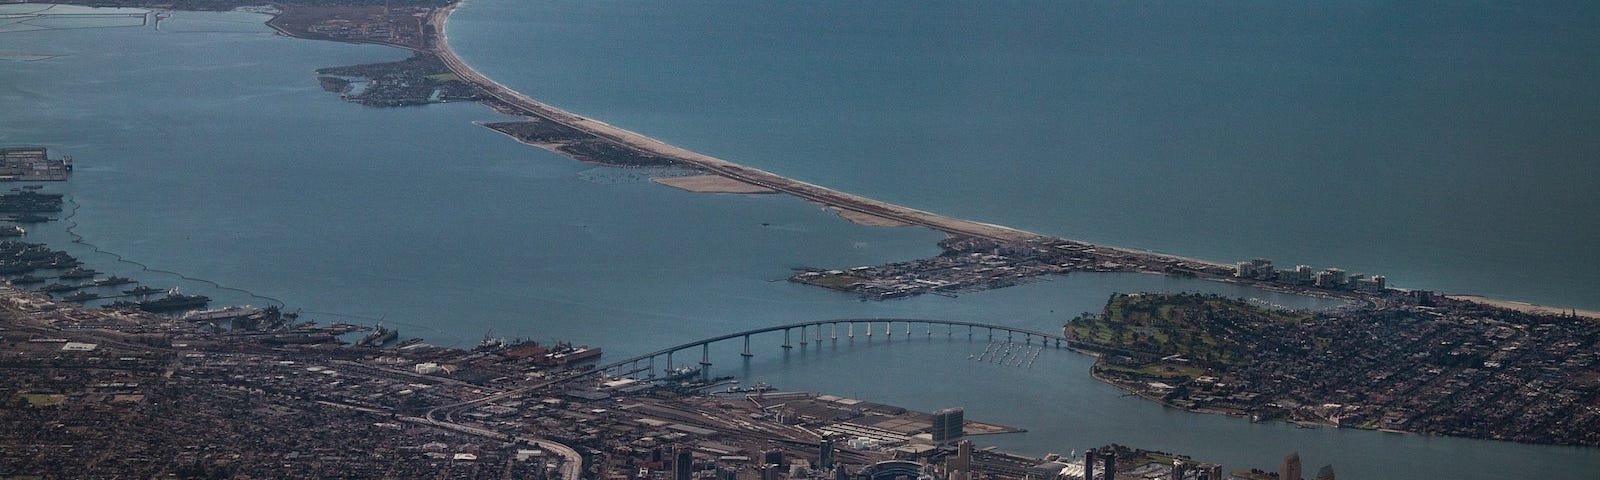 Aerial image of San Diego companies and the local infrastructure